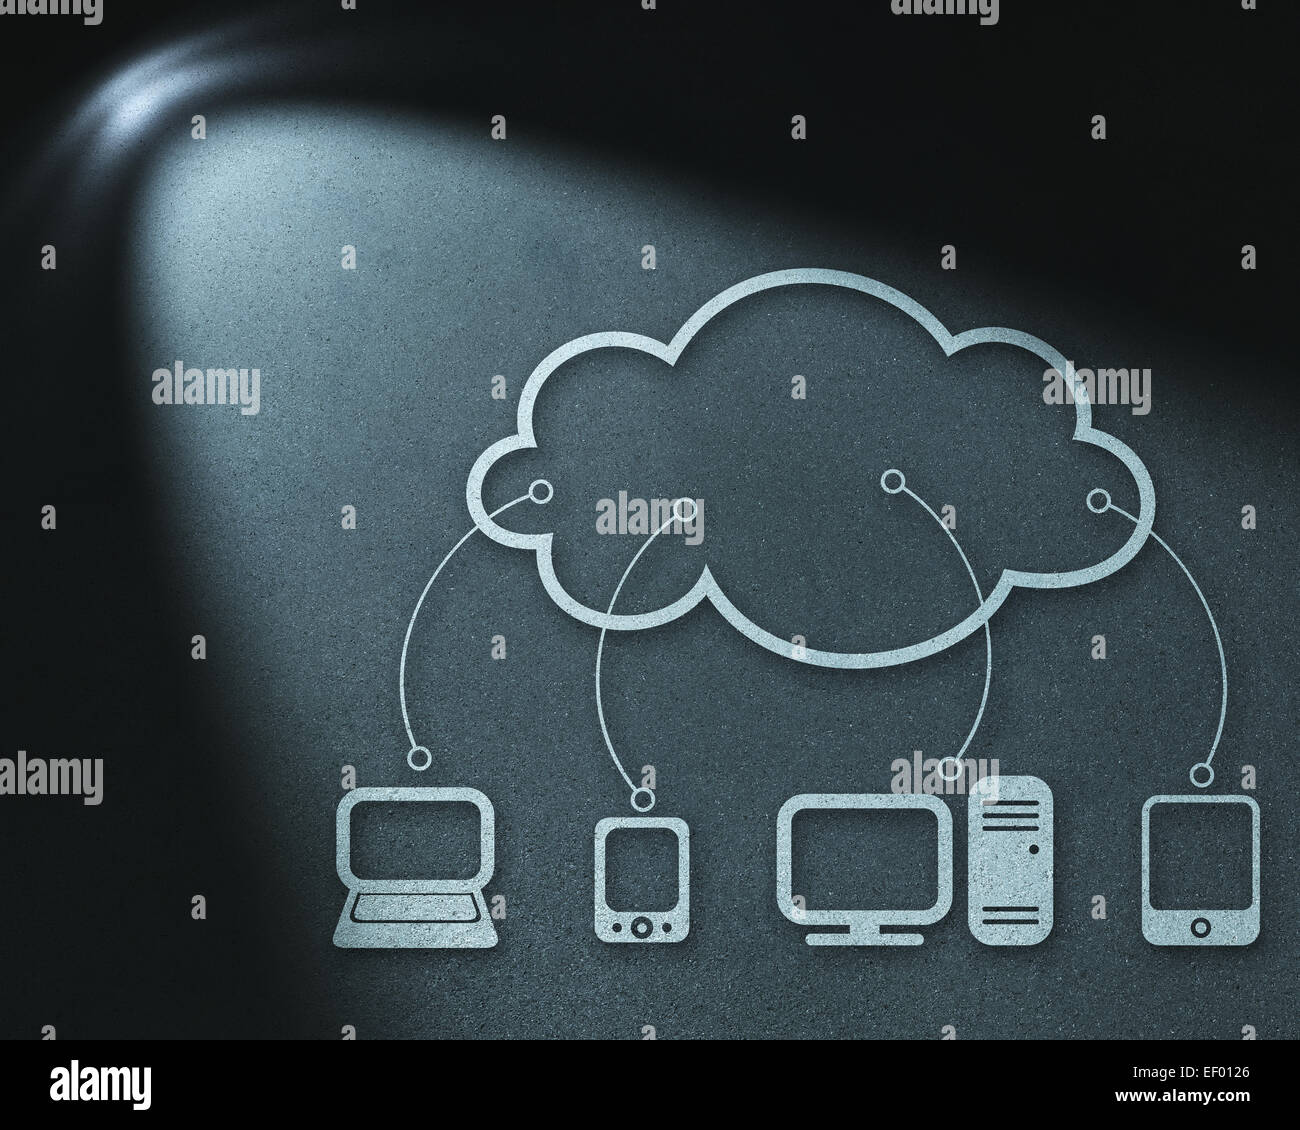 Cloud Computing drawing in spot of light Stock Photo